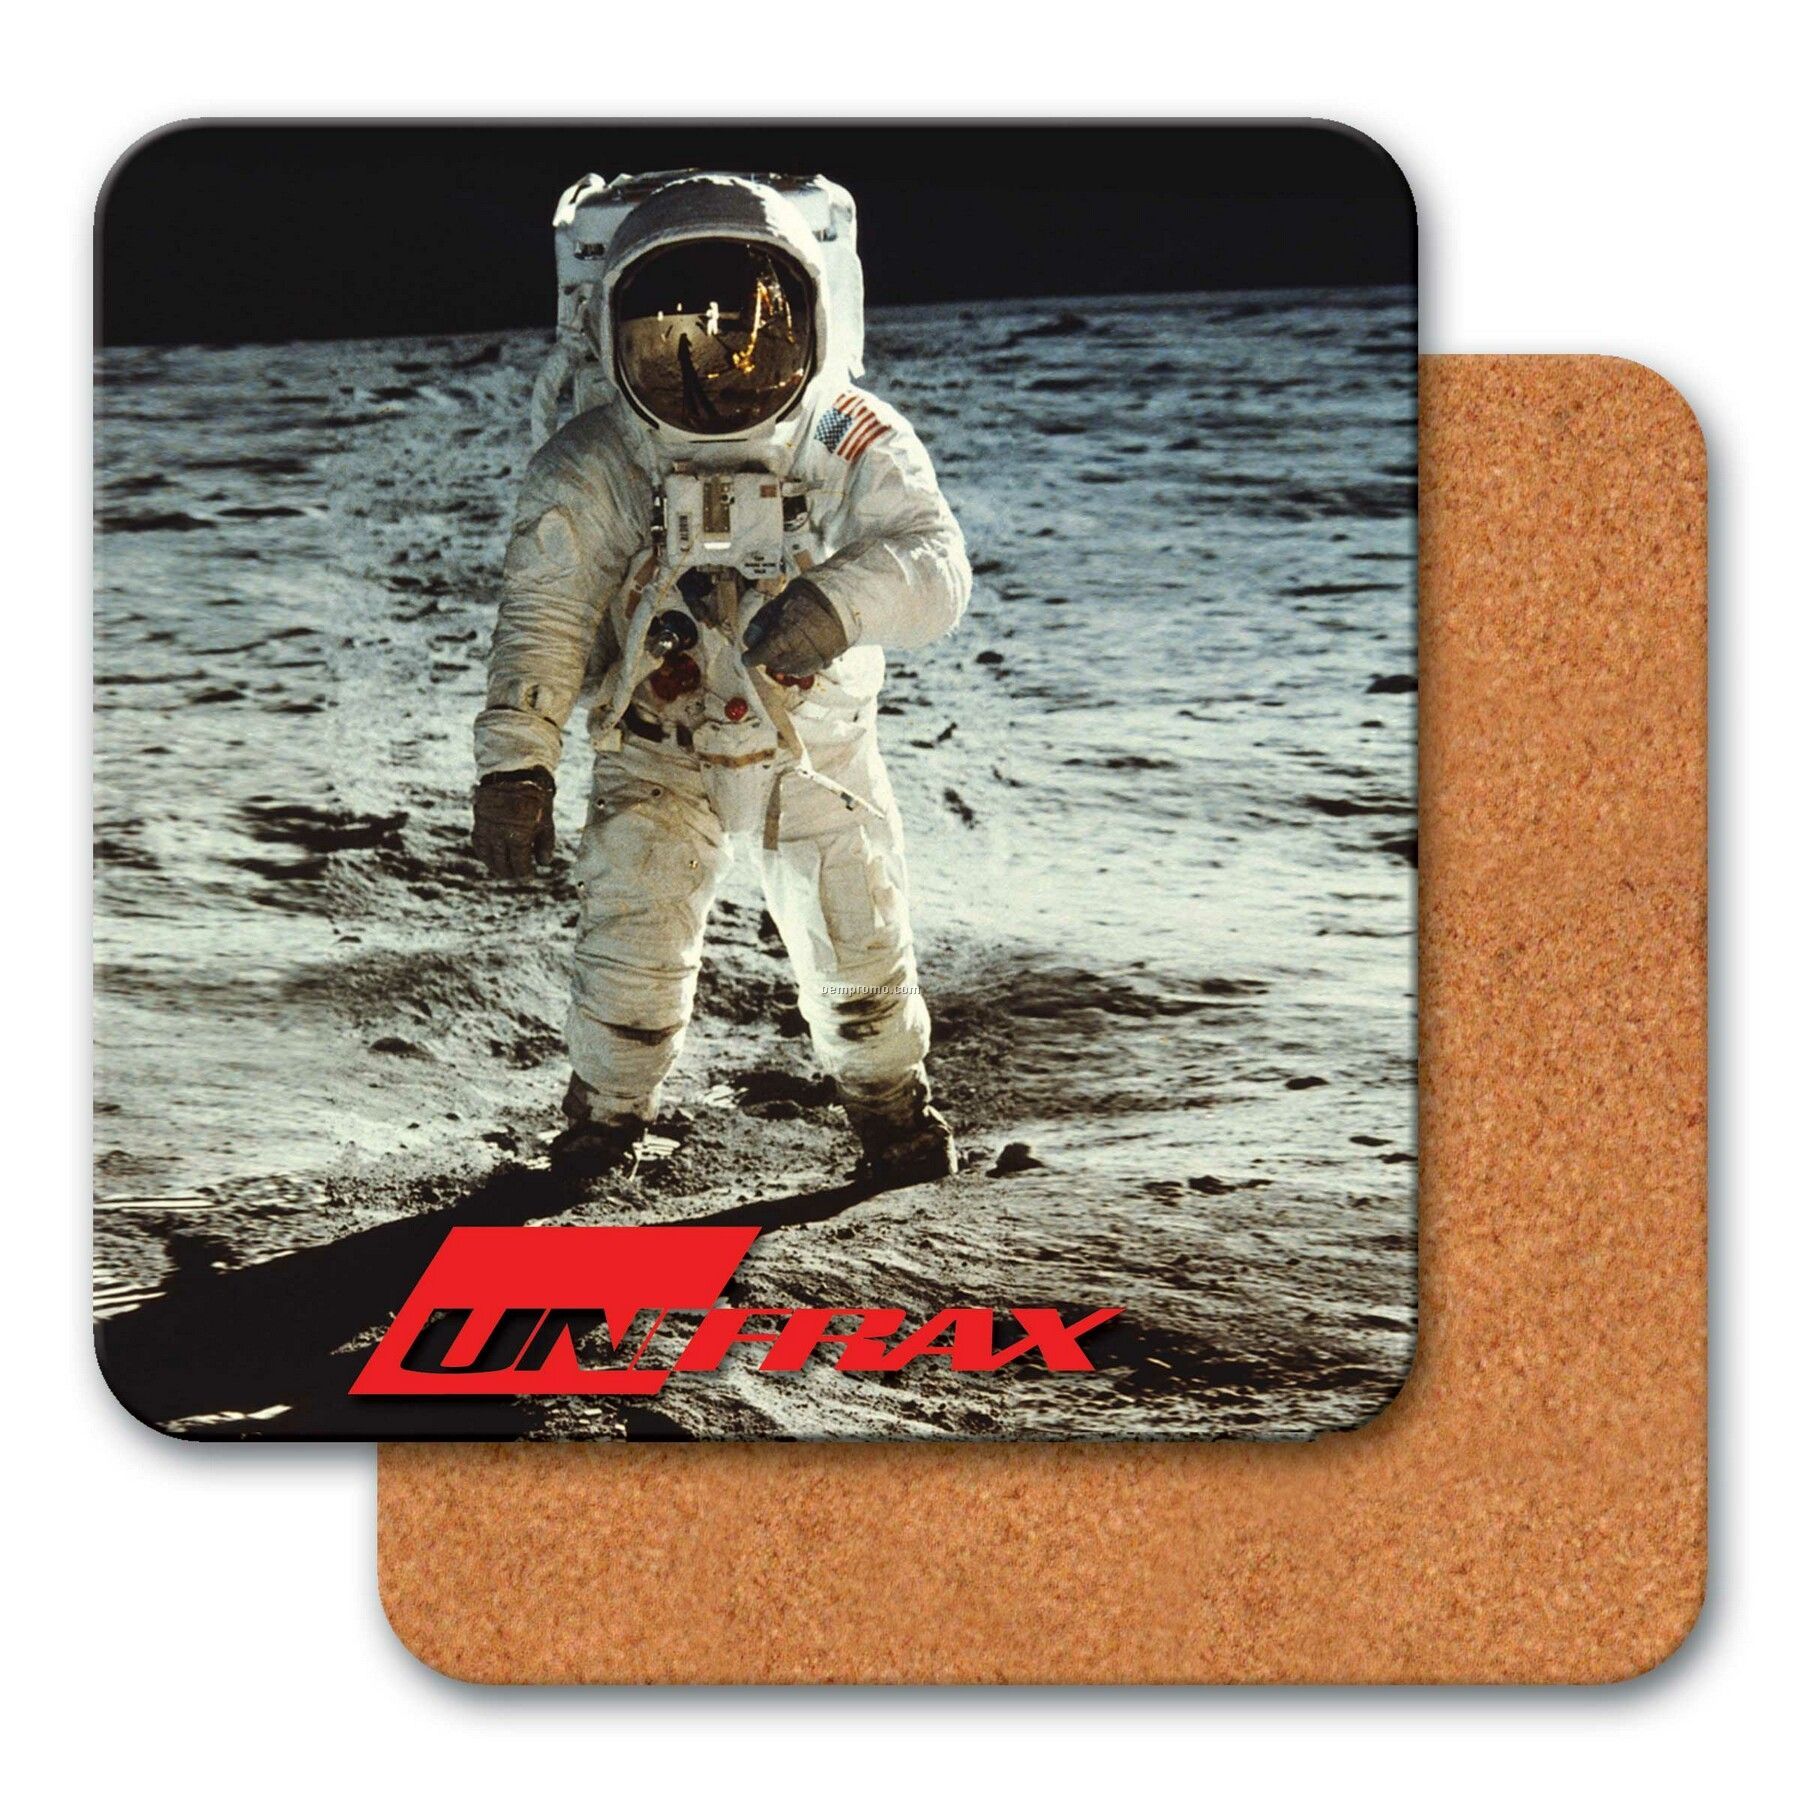 4" Square Coaster W/3d Lenticular Images Of An Astronaut (Imprinted)